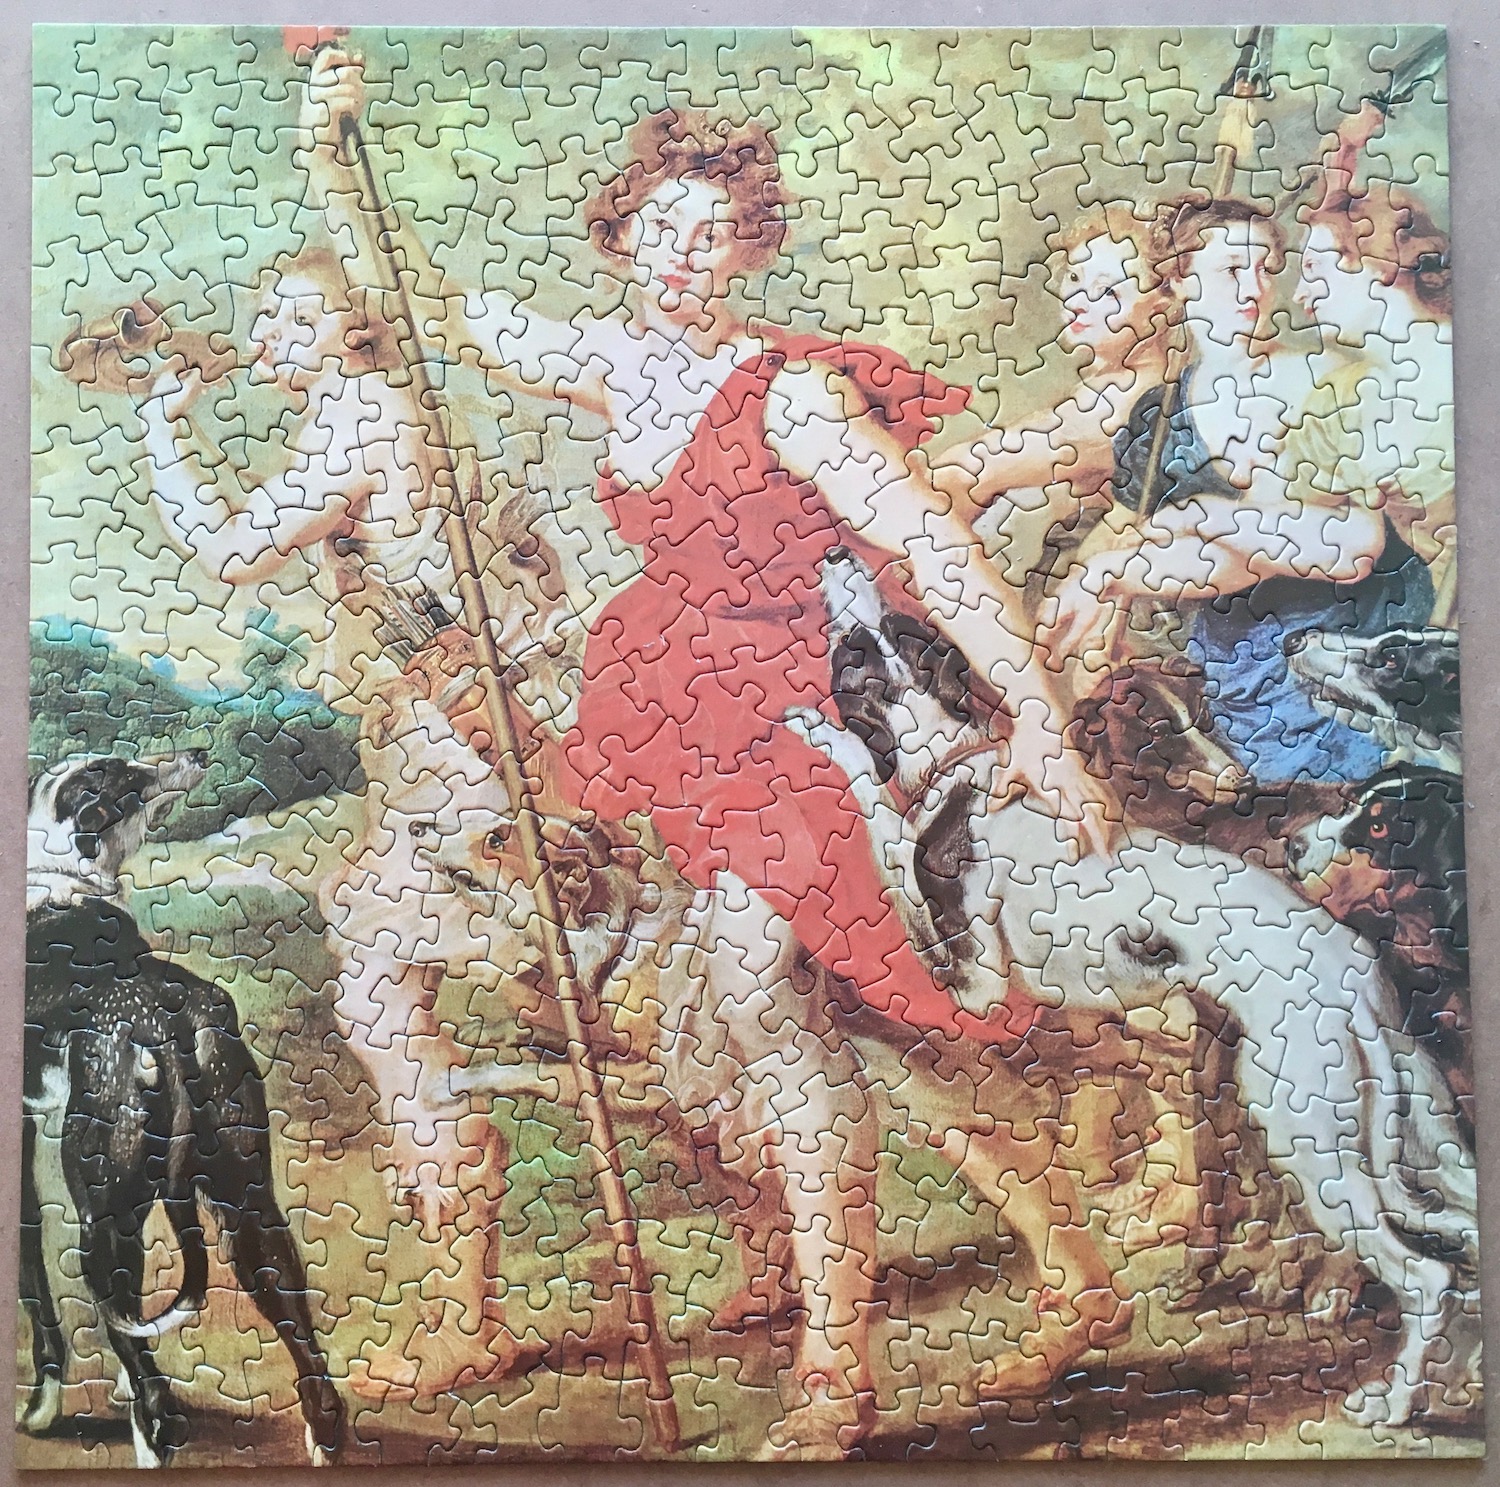 Image of the puzzle 450, Waddington, Diana Hunting, by Peter Paul Rubens, Picture of the puzzle assembled